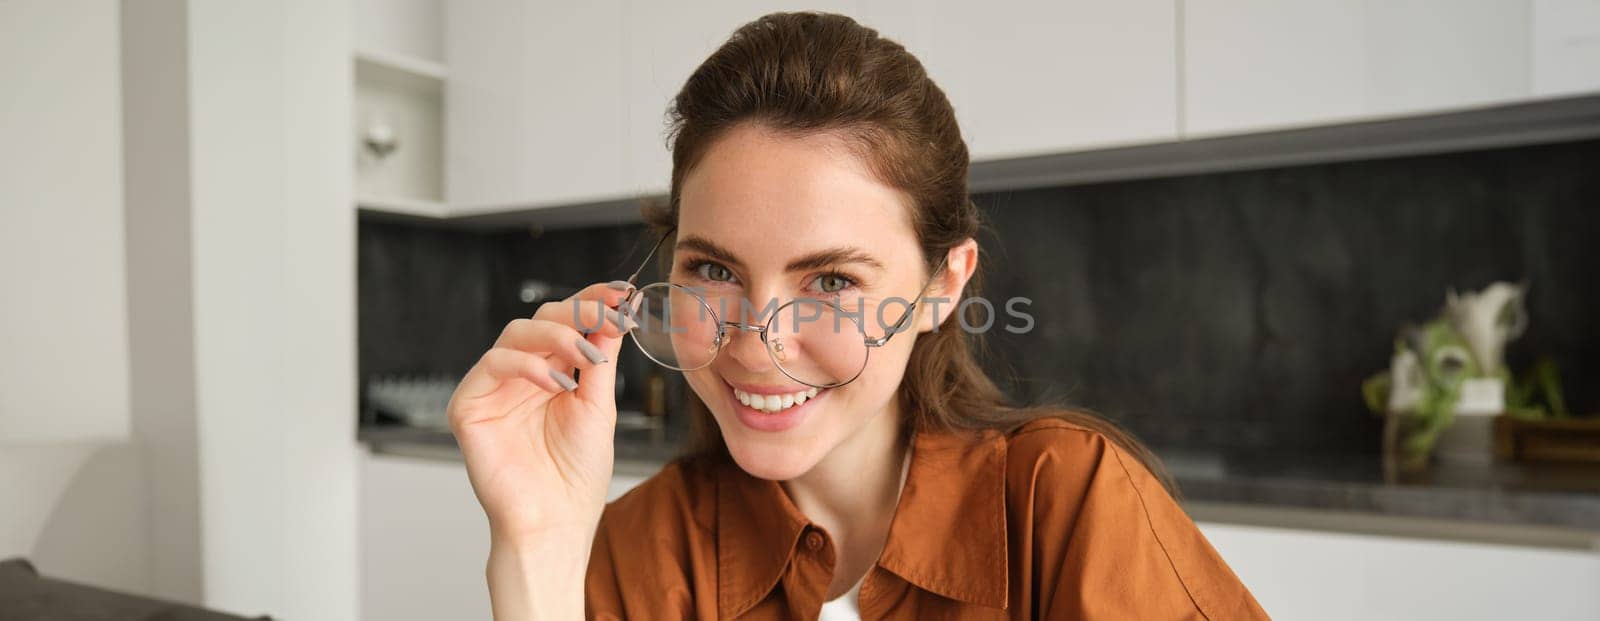 Close up portrait of beautiful brunette woman at home, smiling, wearing her glasses and laughing.